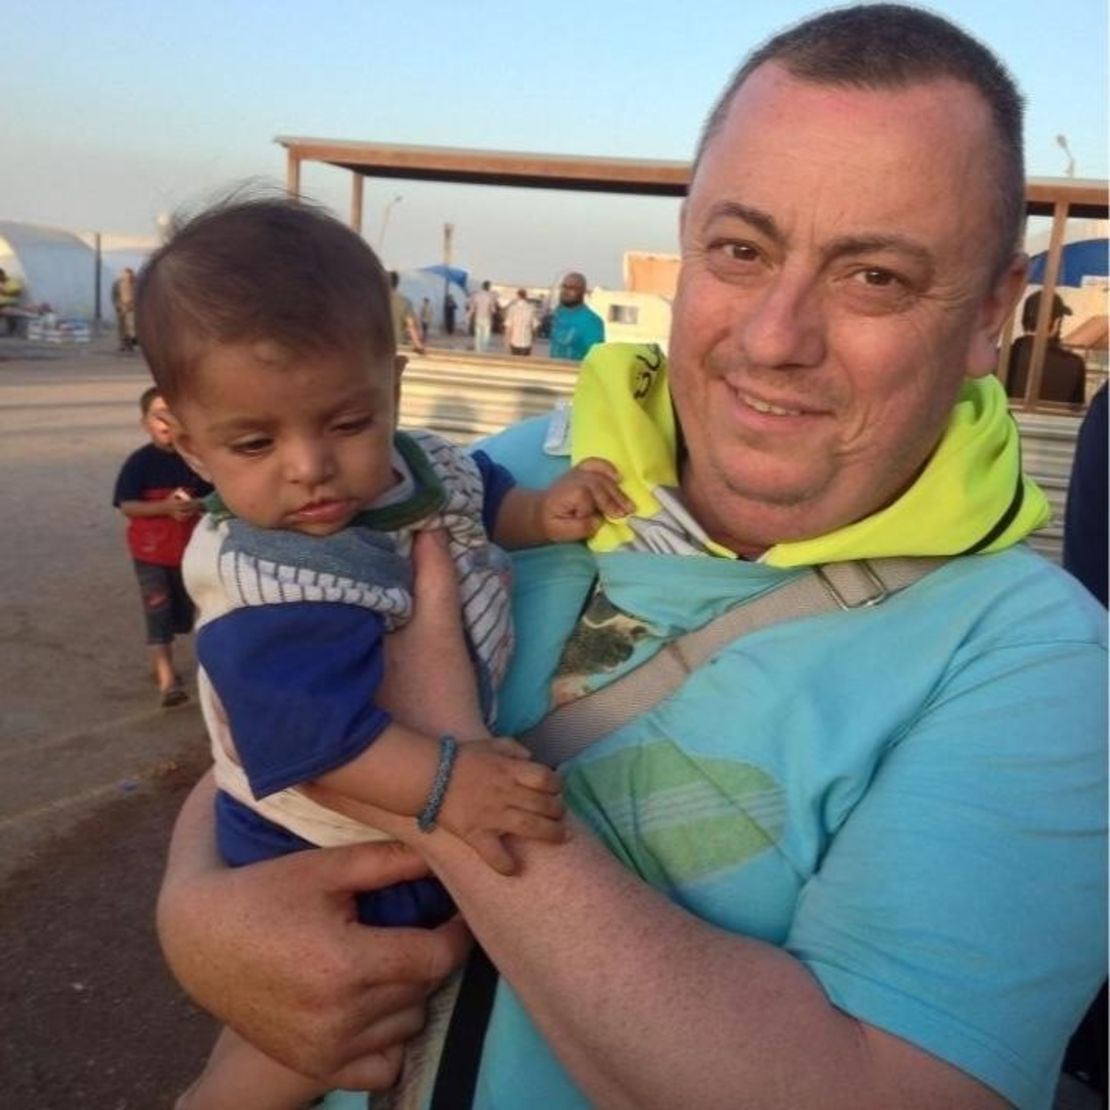 British aid worker Alan Henning is among four Westerners killed by ISIS.